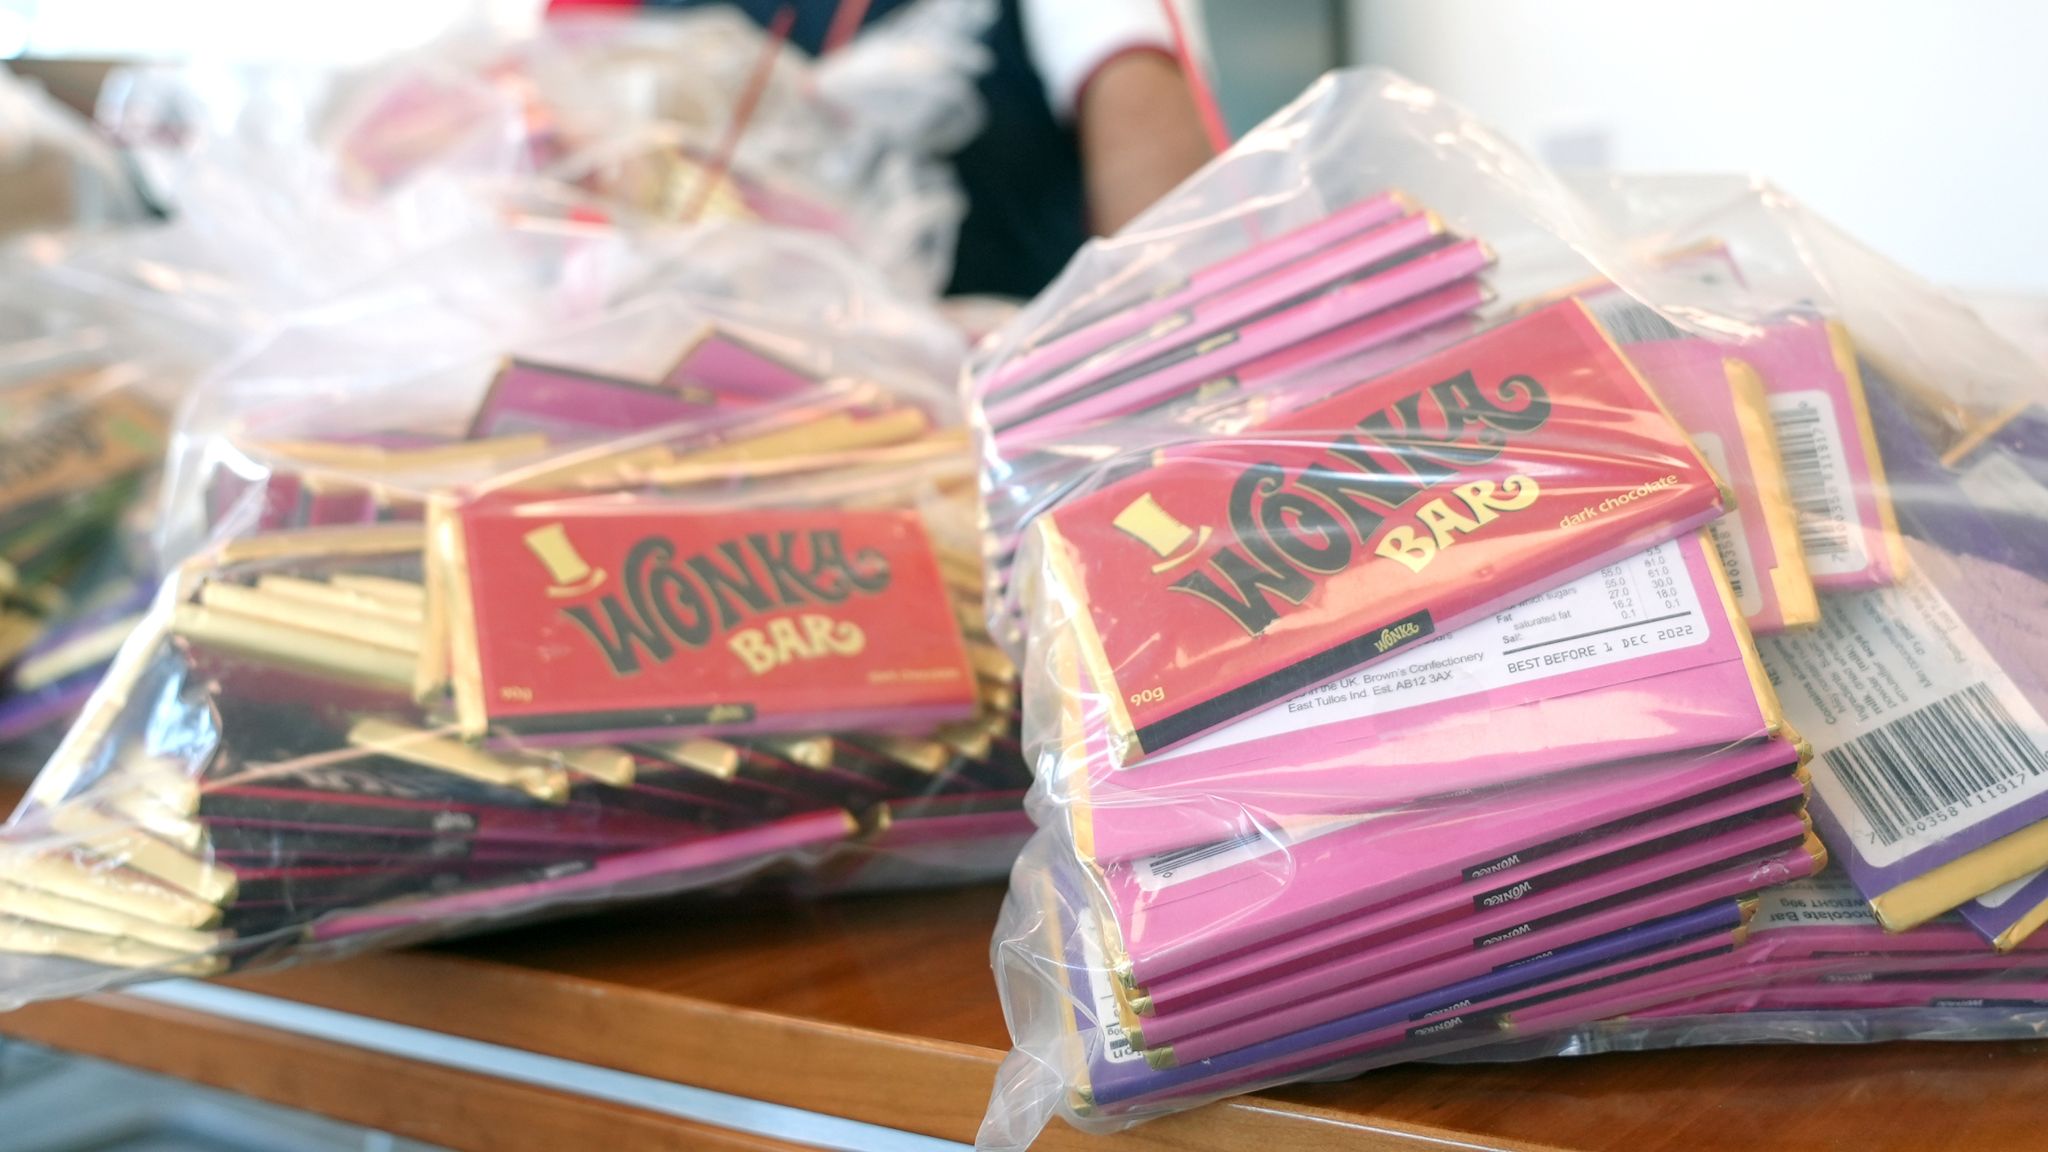 Fake Wonka chocolate bars among £100,000 worth of counterfeit items seized  in raids on Oxford Street stores, UK News